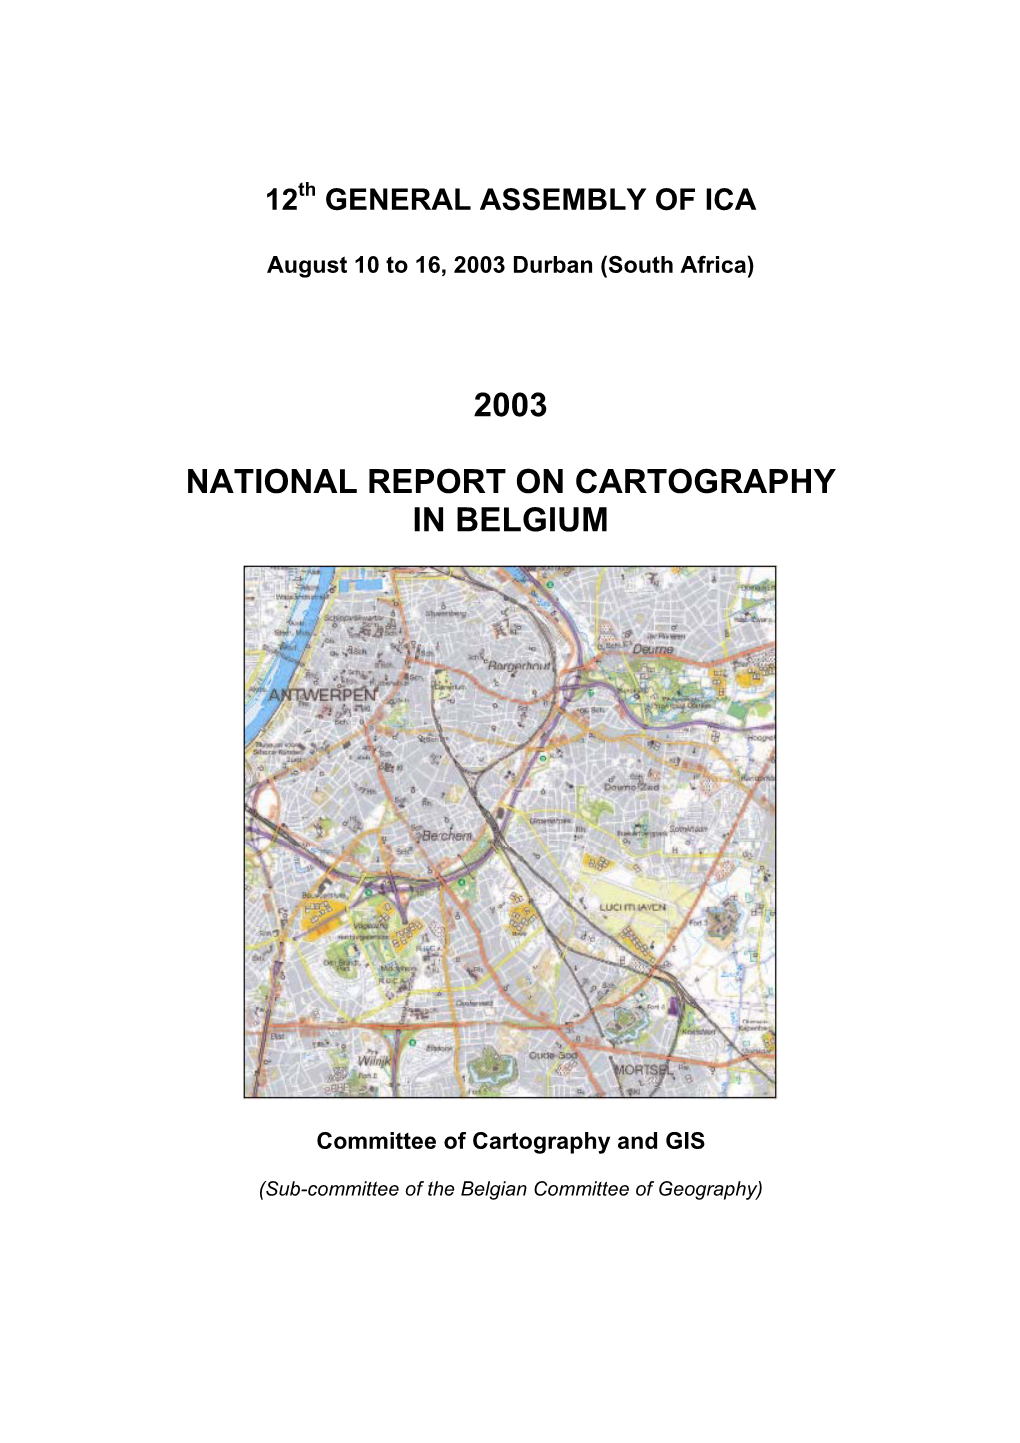 2003 National Report on Cartography in Belgium